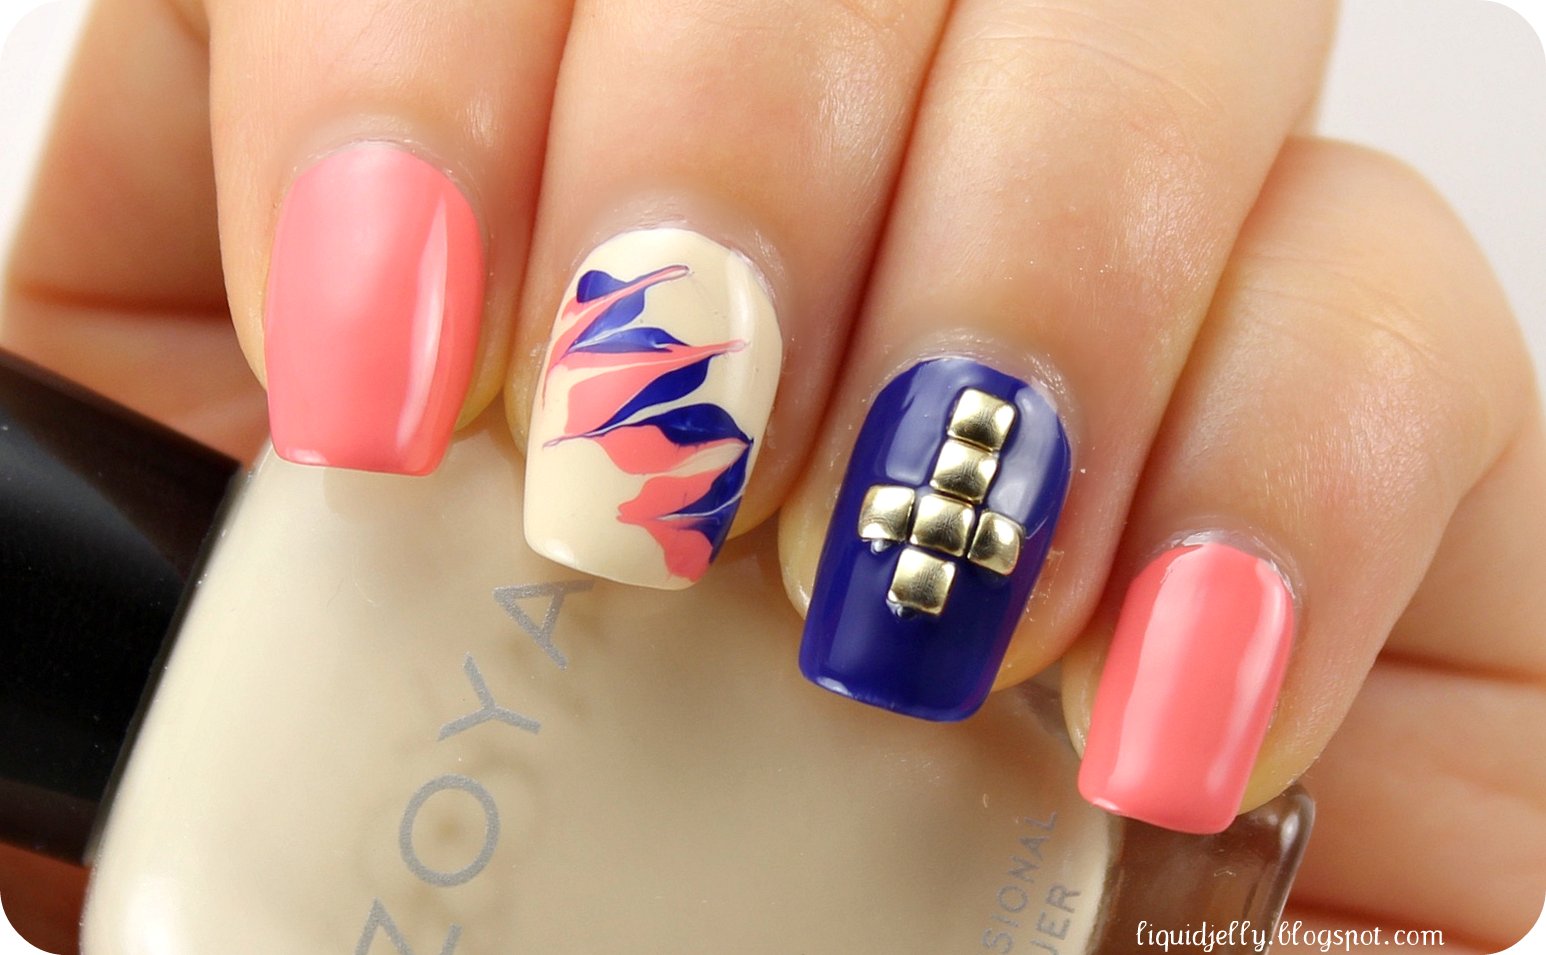 2. Stunning Cross Nail Art Ideas for a Chic and Edgy Look - wide 3